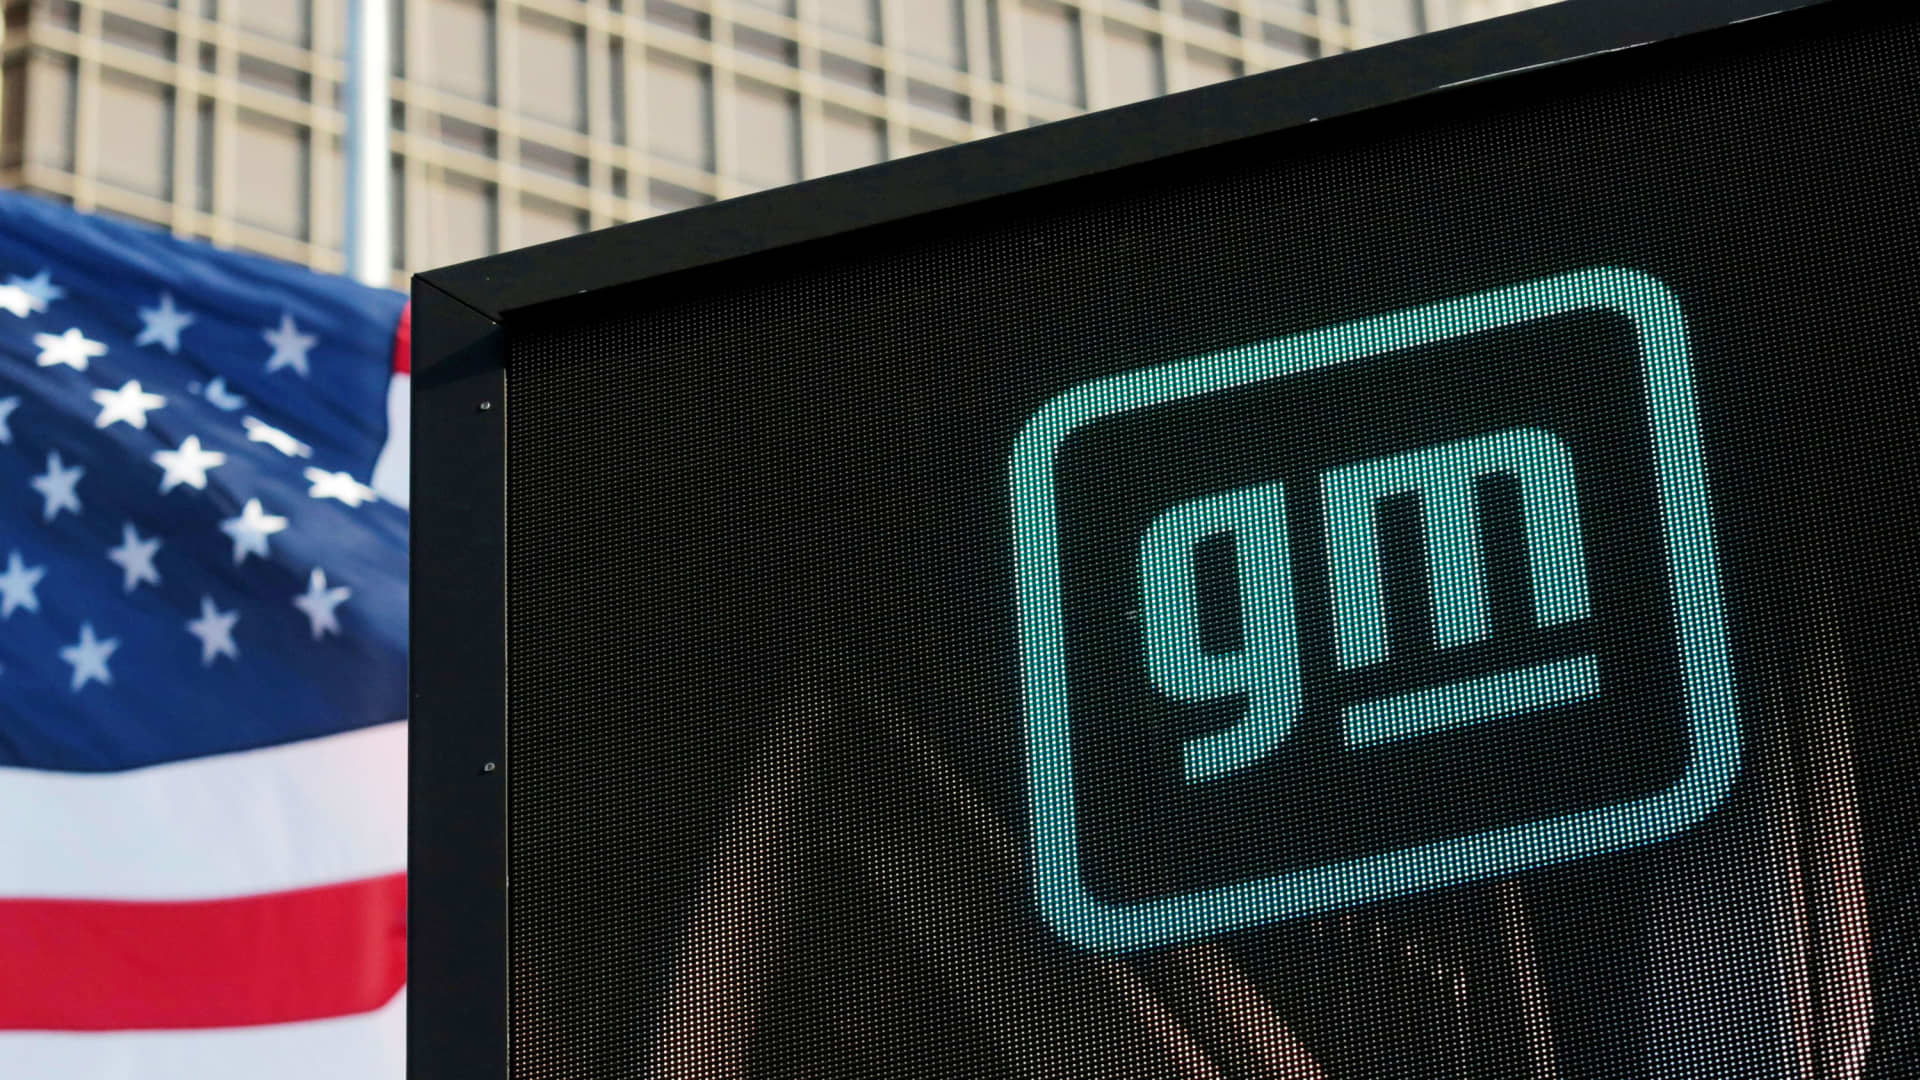 The GM logo is seen on the facade of the General Motors headquarters in Detroit, Michigan, March 16, 2021.